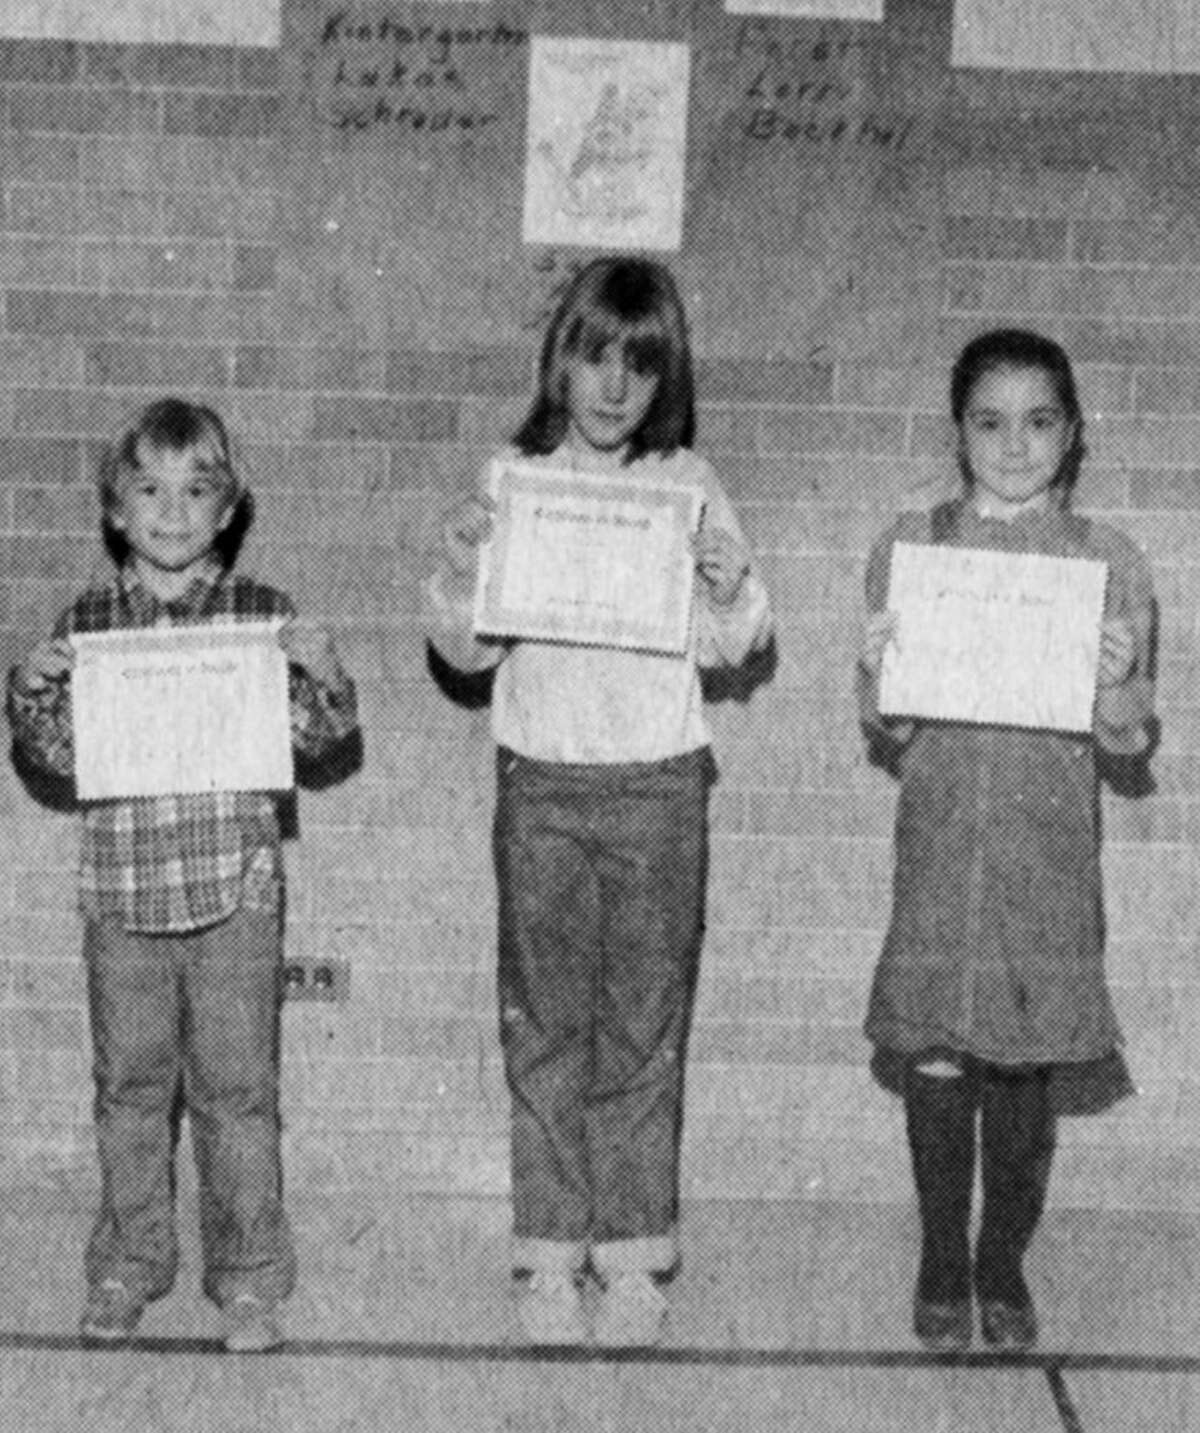 Winners of the poster contest for National Dental Health Month show off their certificates beneath their prize-winning creations displayed at Central Elementary. (From left) Lukas Schrader, kindergarten winner; Amy Zuchowski, second grade winner; Lorrie Bockhol, first grade winner. The photo was published in the News Advocate on March 3, 1983.